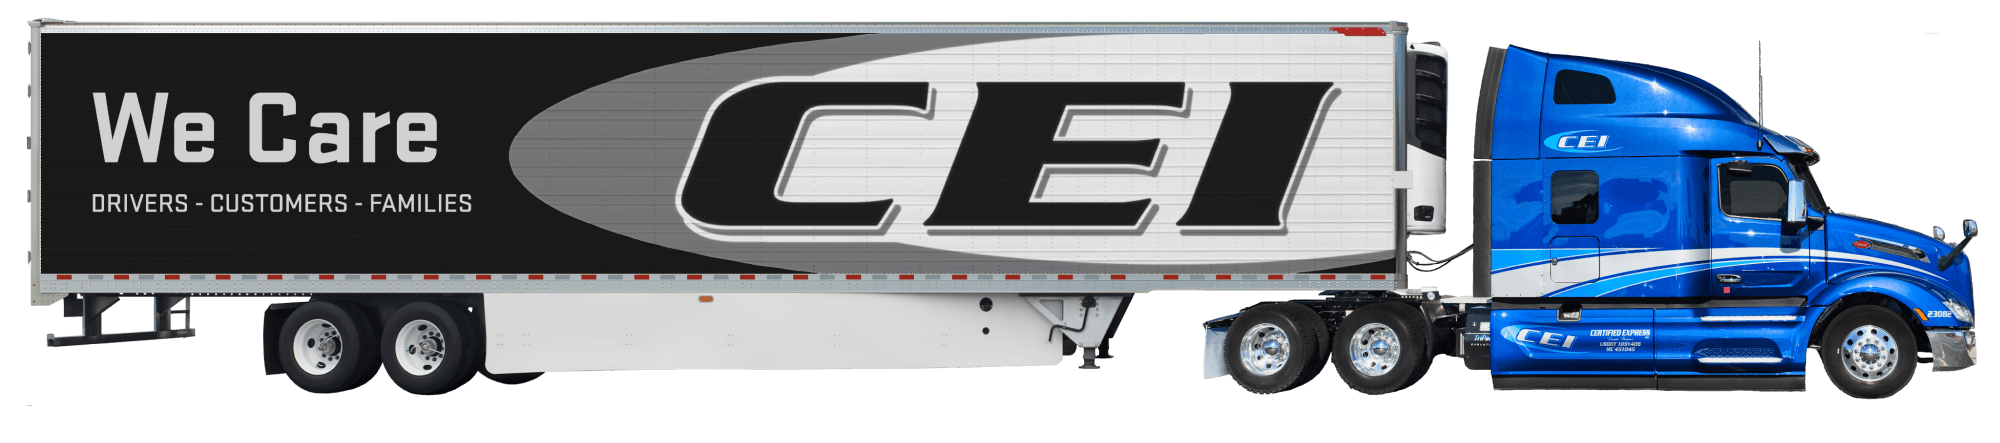 A CEI truck drives across the screen with the text "We Care: Drivers - Customers - Families" printed on the trailer.